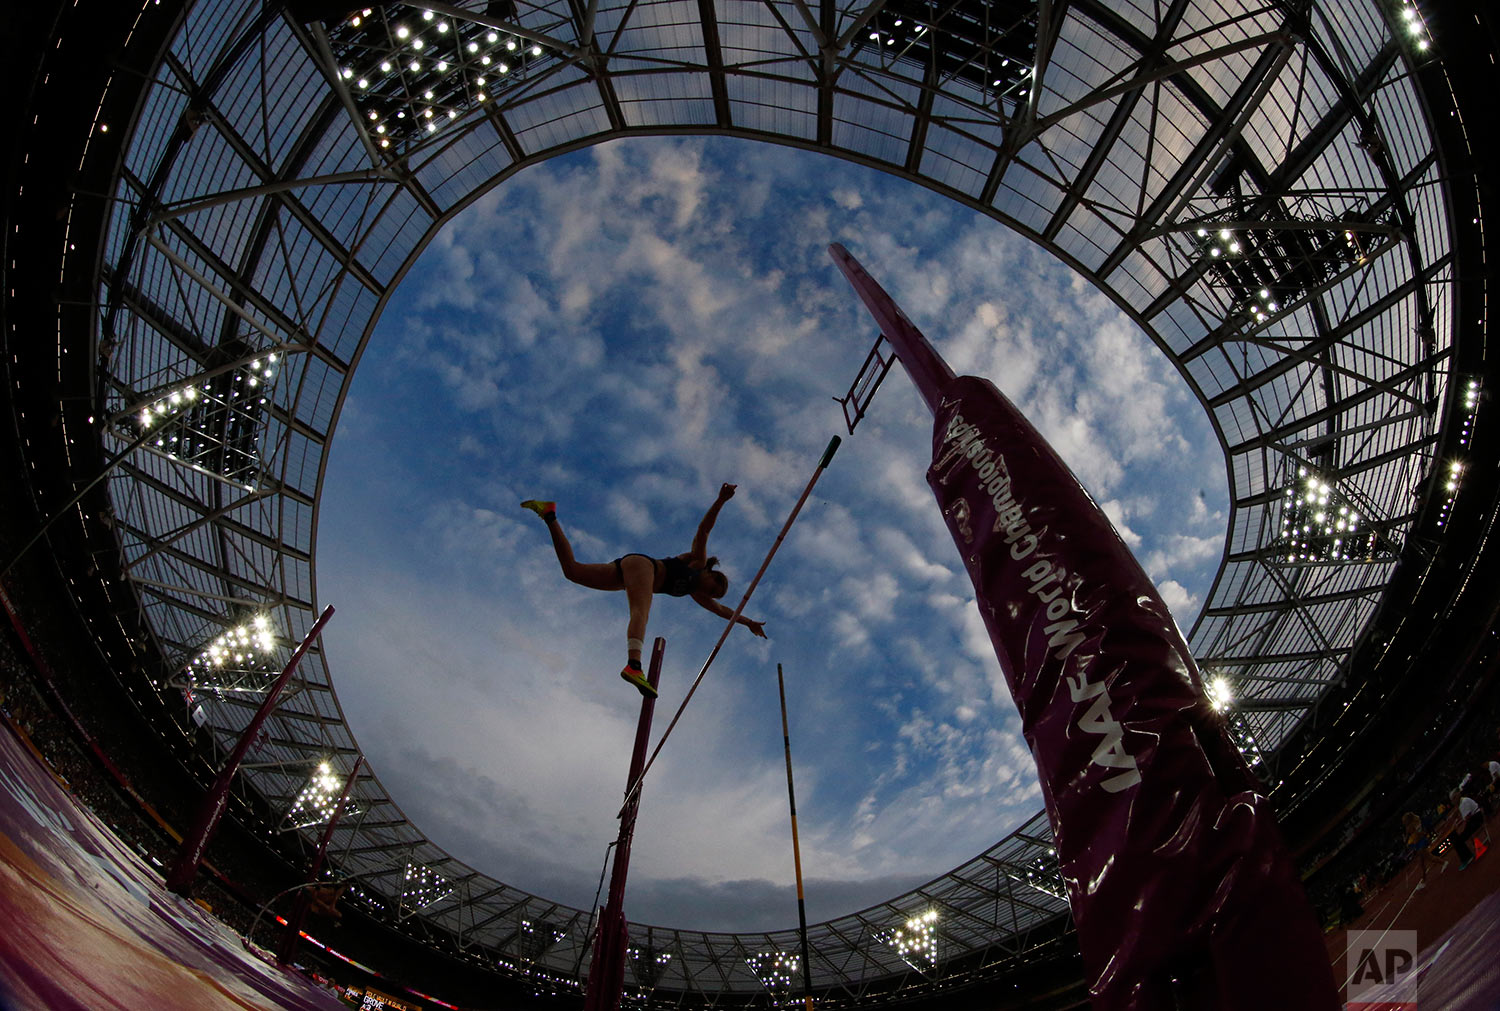  United States' Emily Grove competes in the women's pole vault qualification during the World Athletics Championships in London Friday, Aug. 4, 2017. (AP Photo/Matthias Schrader) 